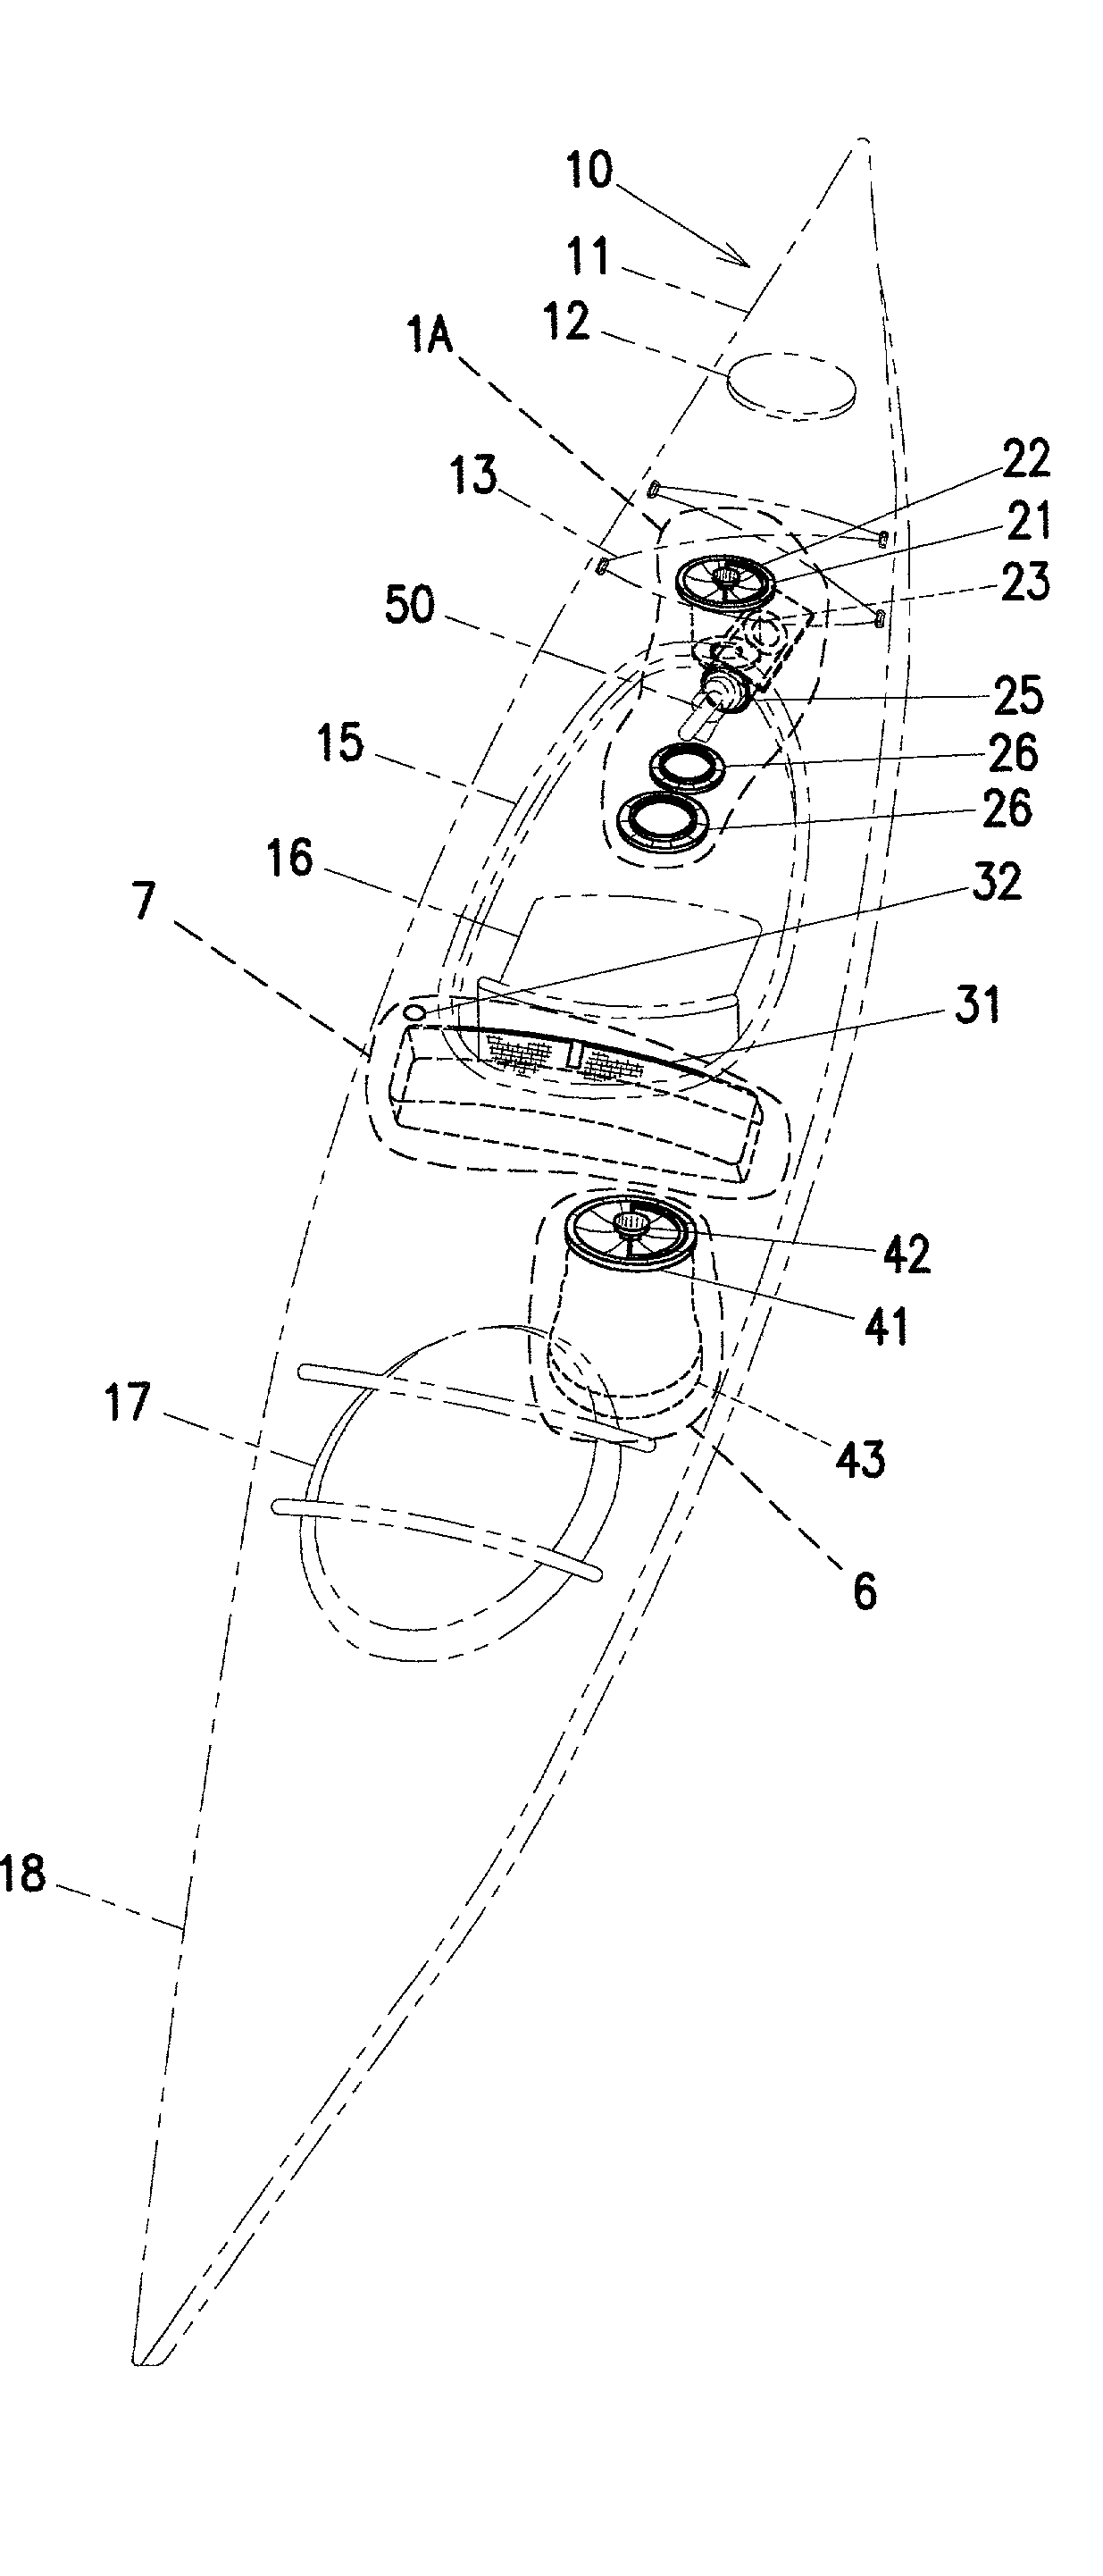 Integrated safety accessory arrangement and components for users of personal watercraft